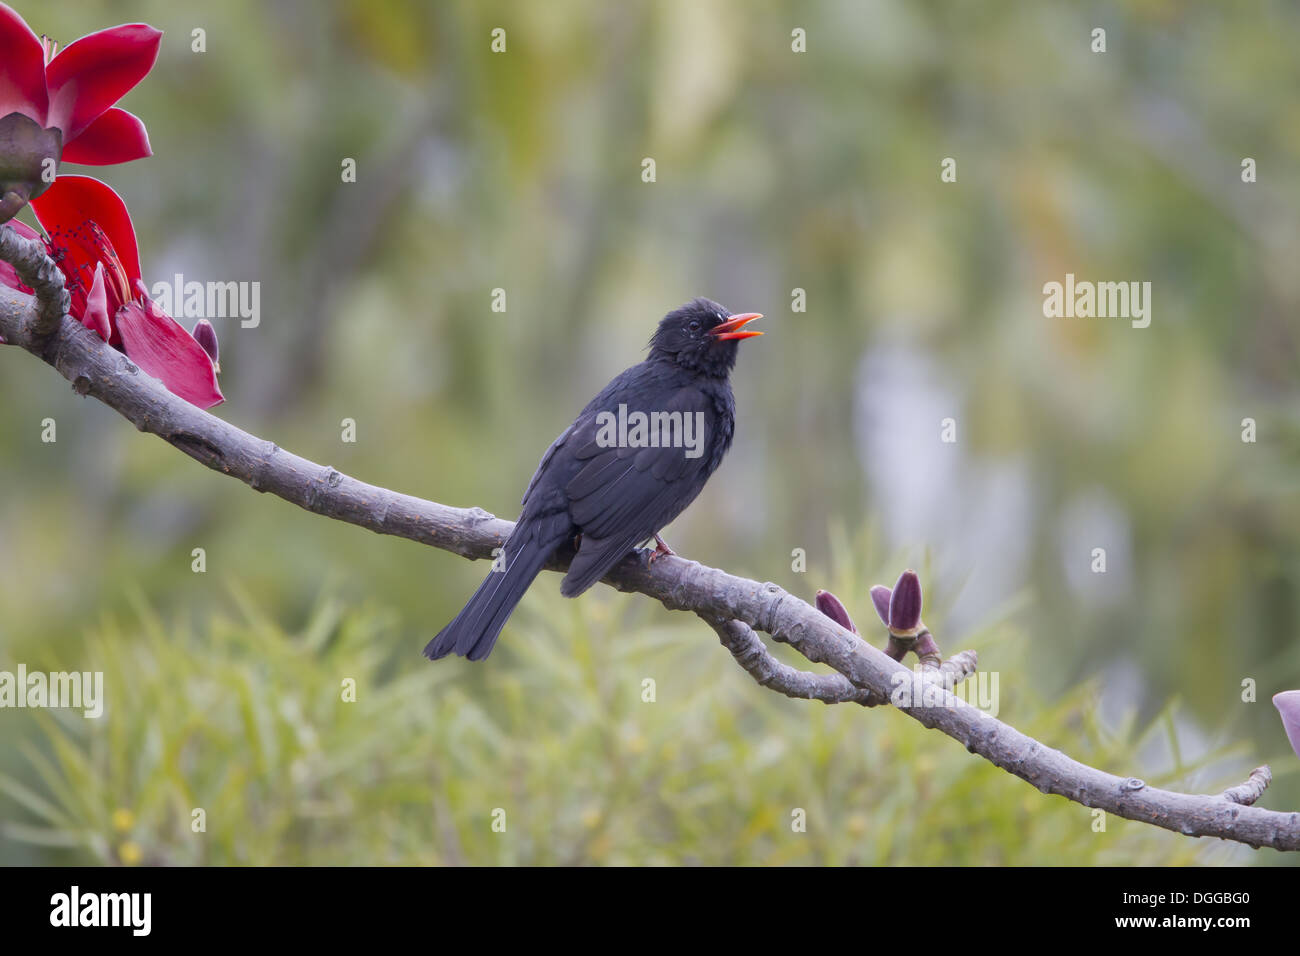 Black Bulbul (Hypsipetes leucocephalus) adult, with beak open, perched on branch with flowers, Hong Kong, China, March Stock Photo